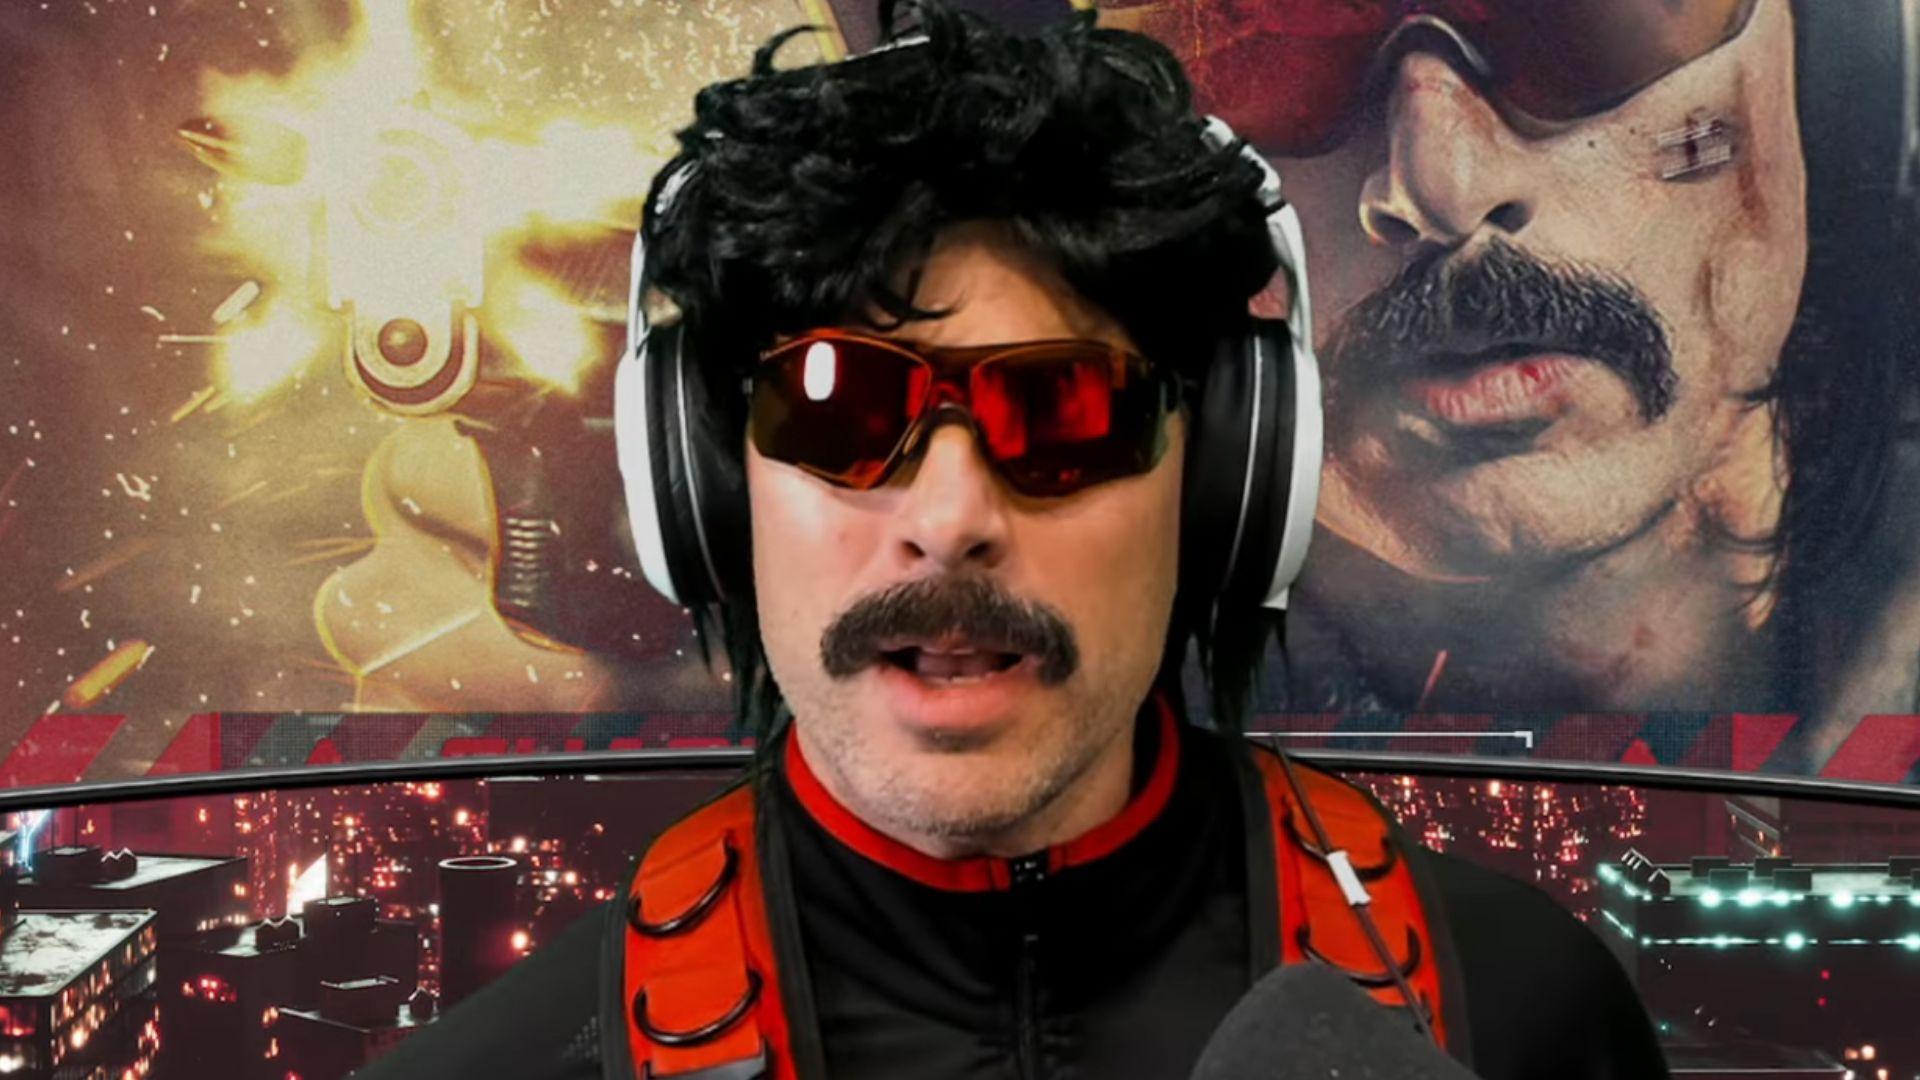 Dr Disrespect talking to camera with picture of himself in background